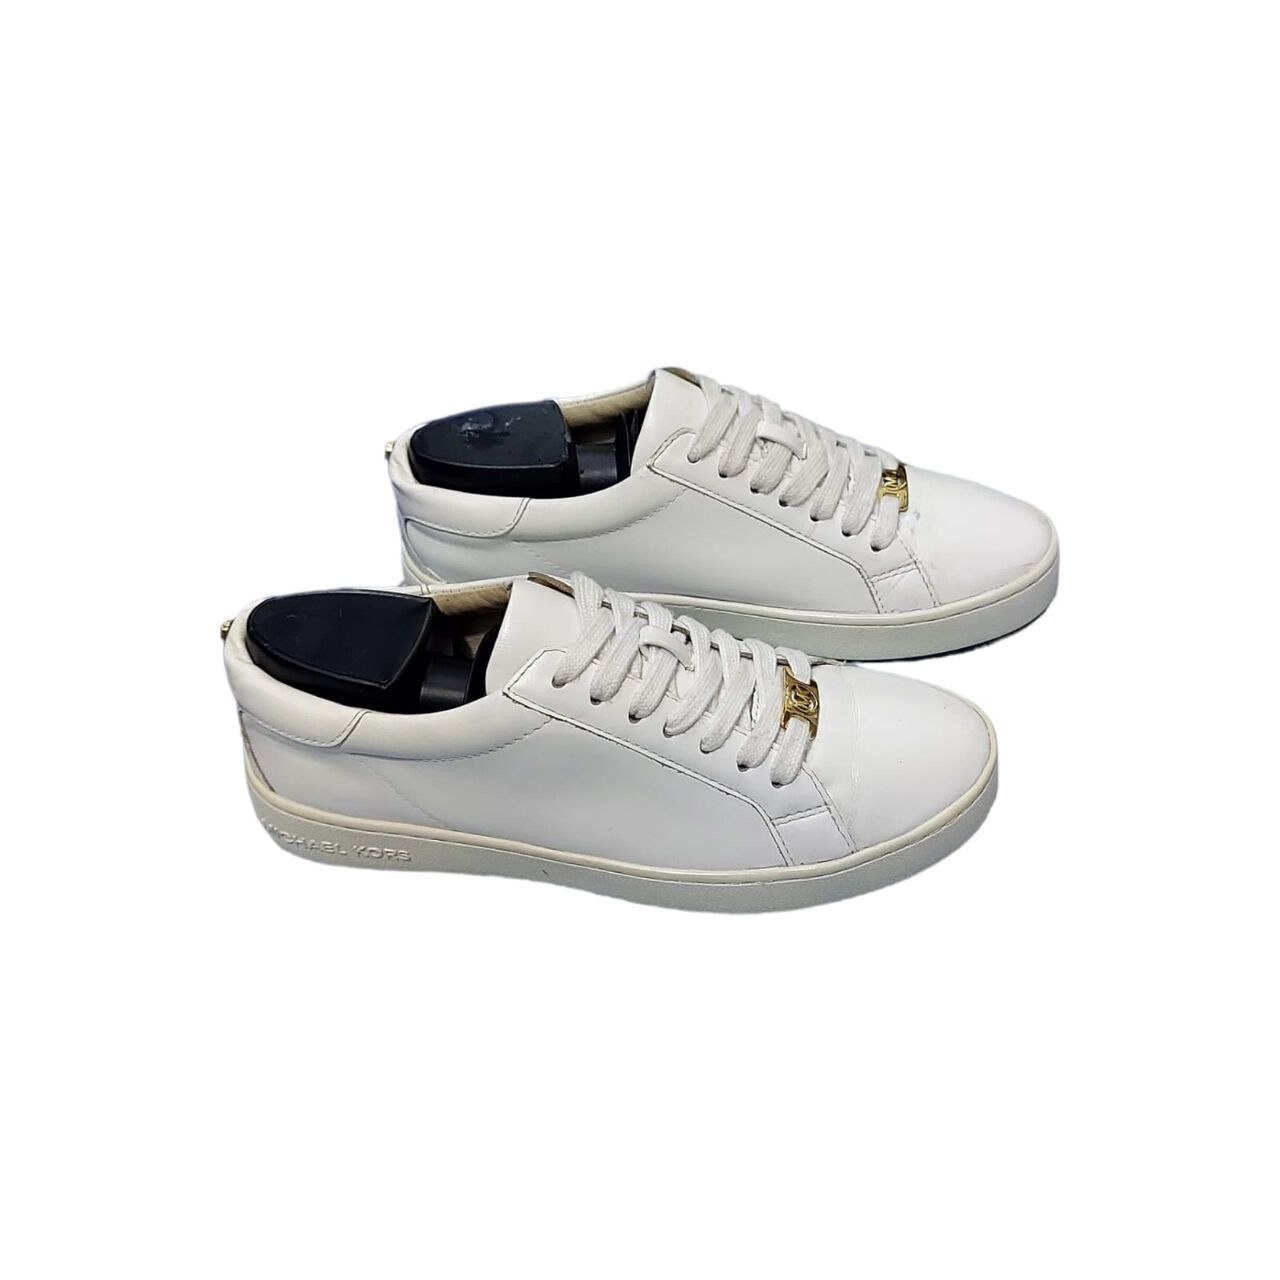 Michael Kors Colby White Sneakers